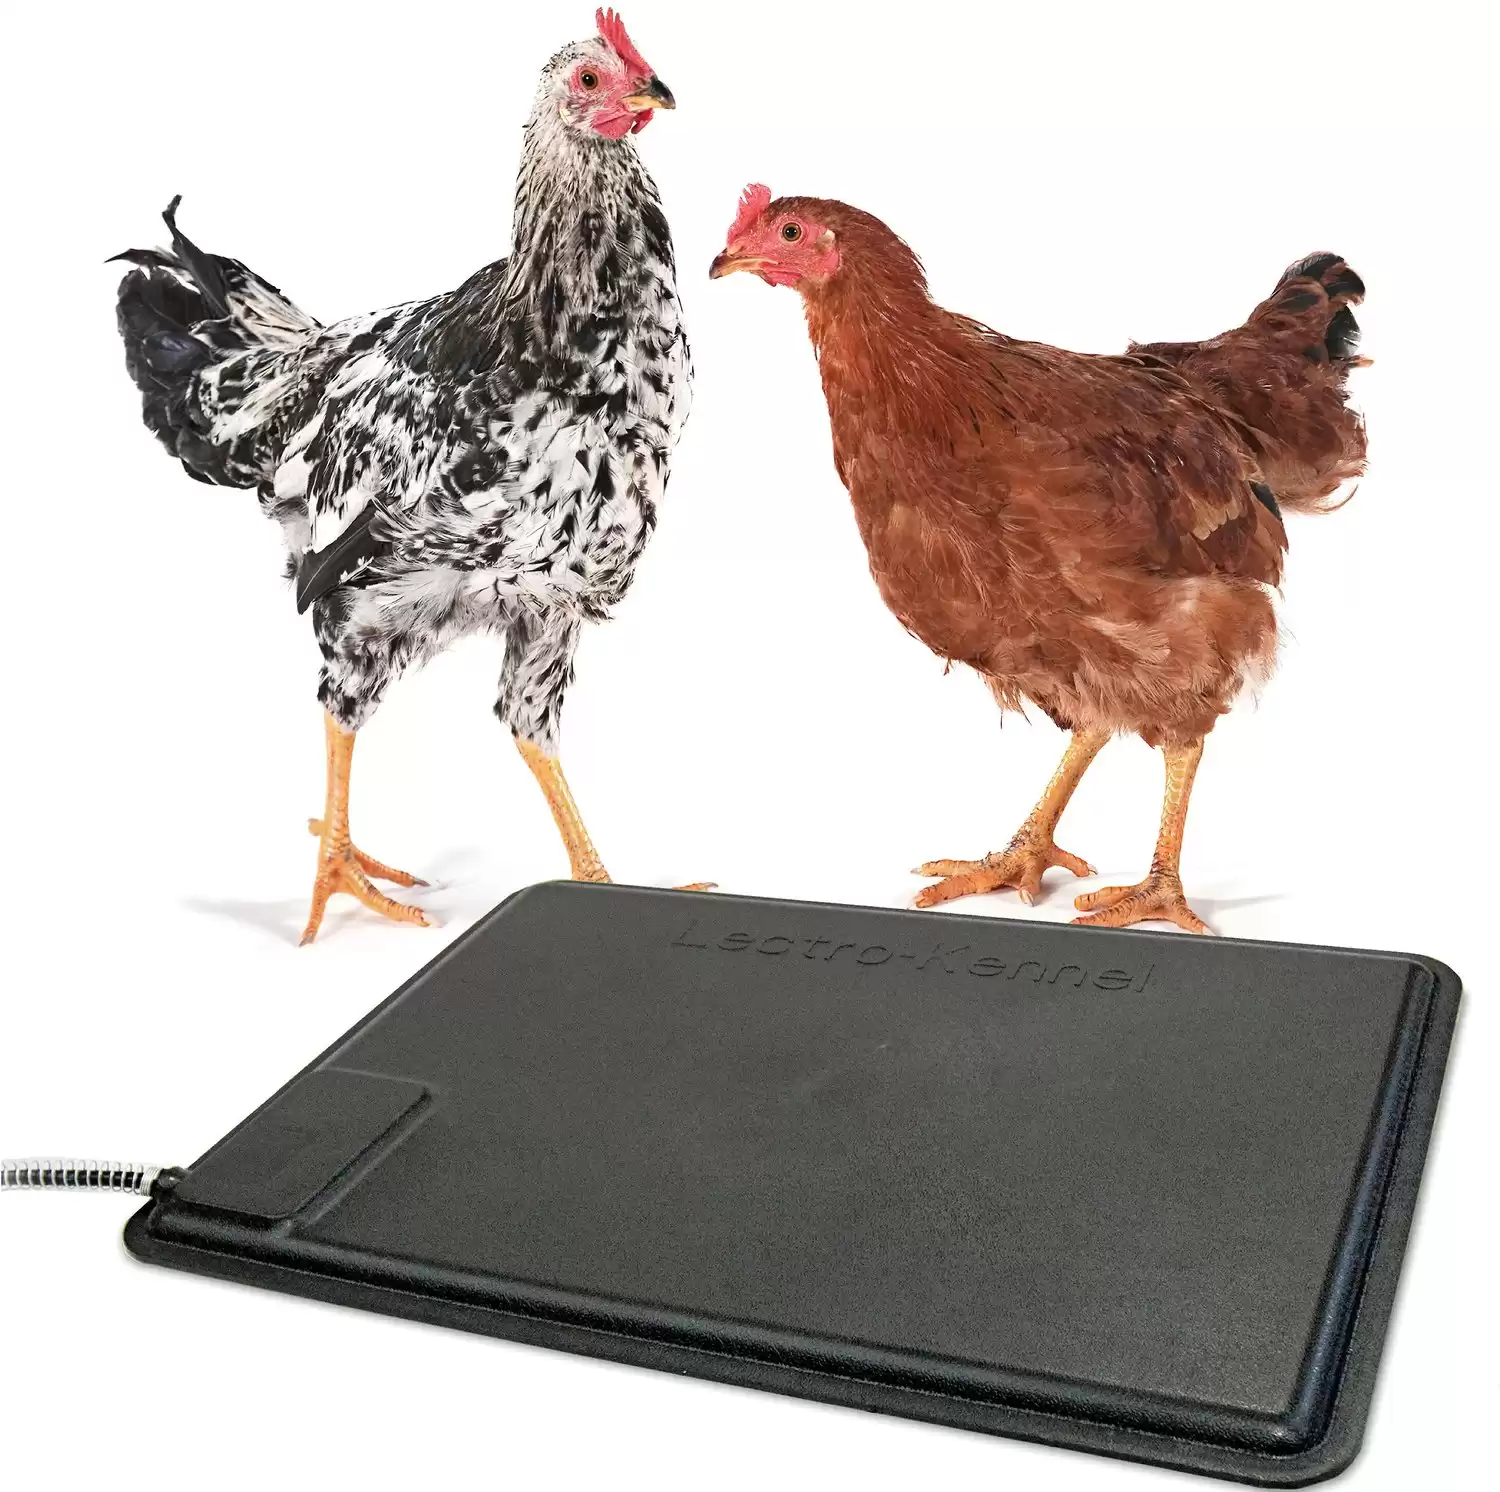 K&H Pet Products Thermo-Chicken Heated Pad